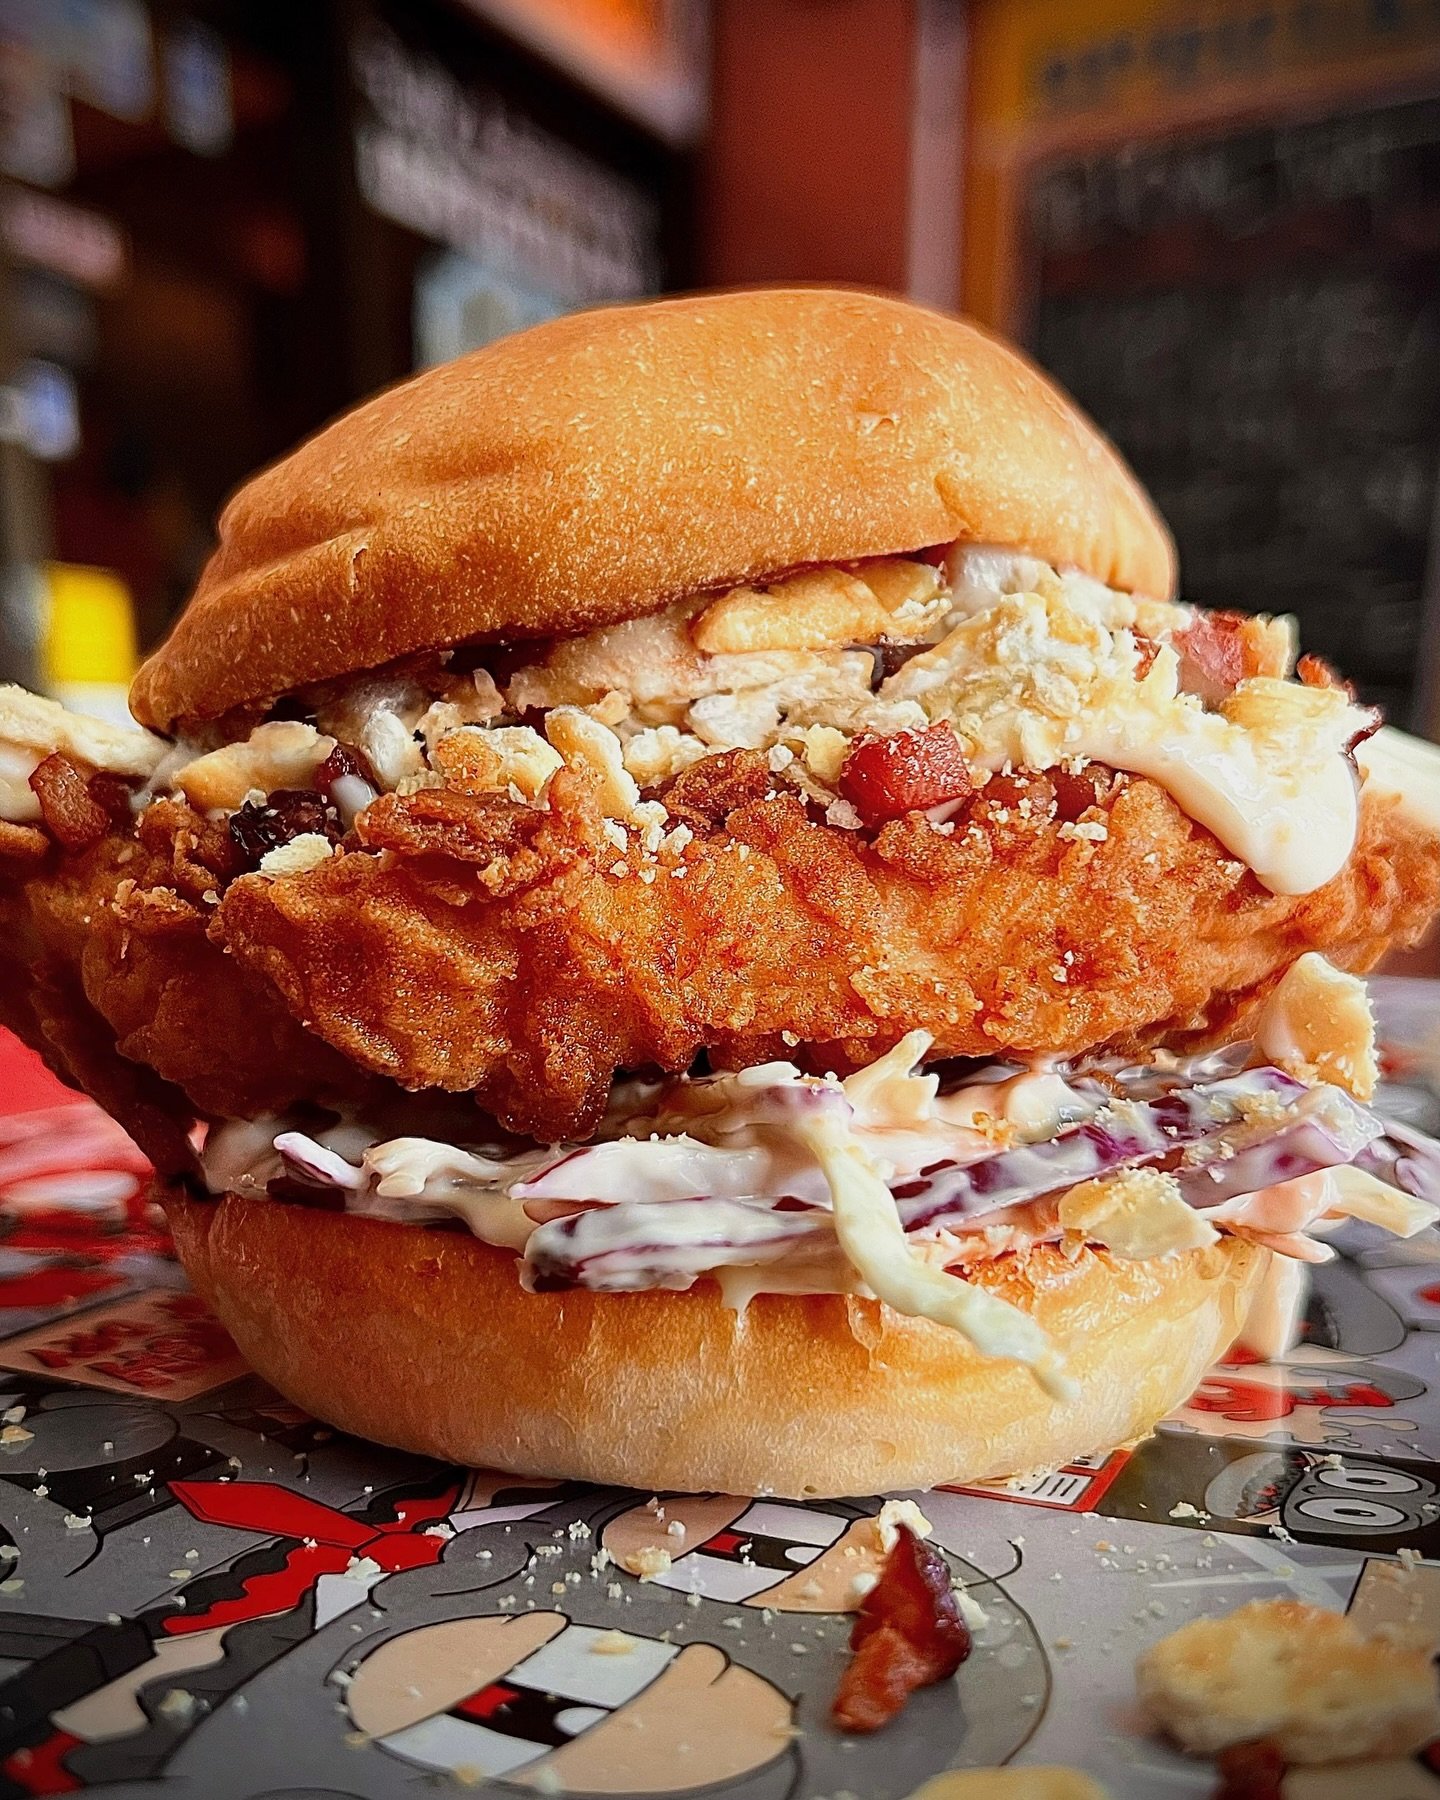 FLAVOURRRR YOU CAN SEEEEEE!!!! ☠️☠️☠️

😵🚨 CRIMPIN&rsquo; AINT EASY 🚨😵
- Chicken Crimpy SHAPES Crumbed Chicken
- Bacon Bits
- Sour Cream Aioli
- Fresh Slaw
- Extra Crimpy Dust

KINDA LIKE THE MOVIE INCEPTION BUT WITH CHICKEN!! 🐔🐔🐔 

CHICKEN CRI